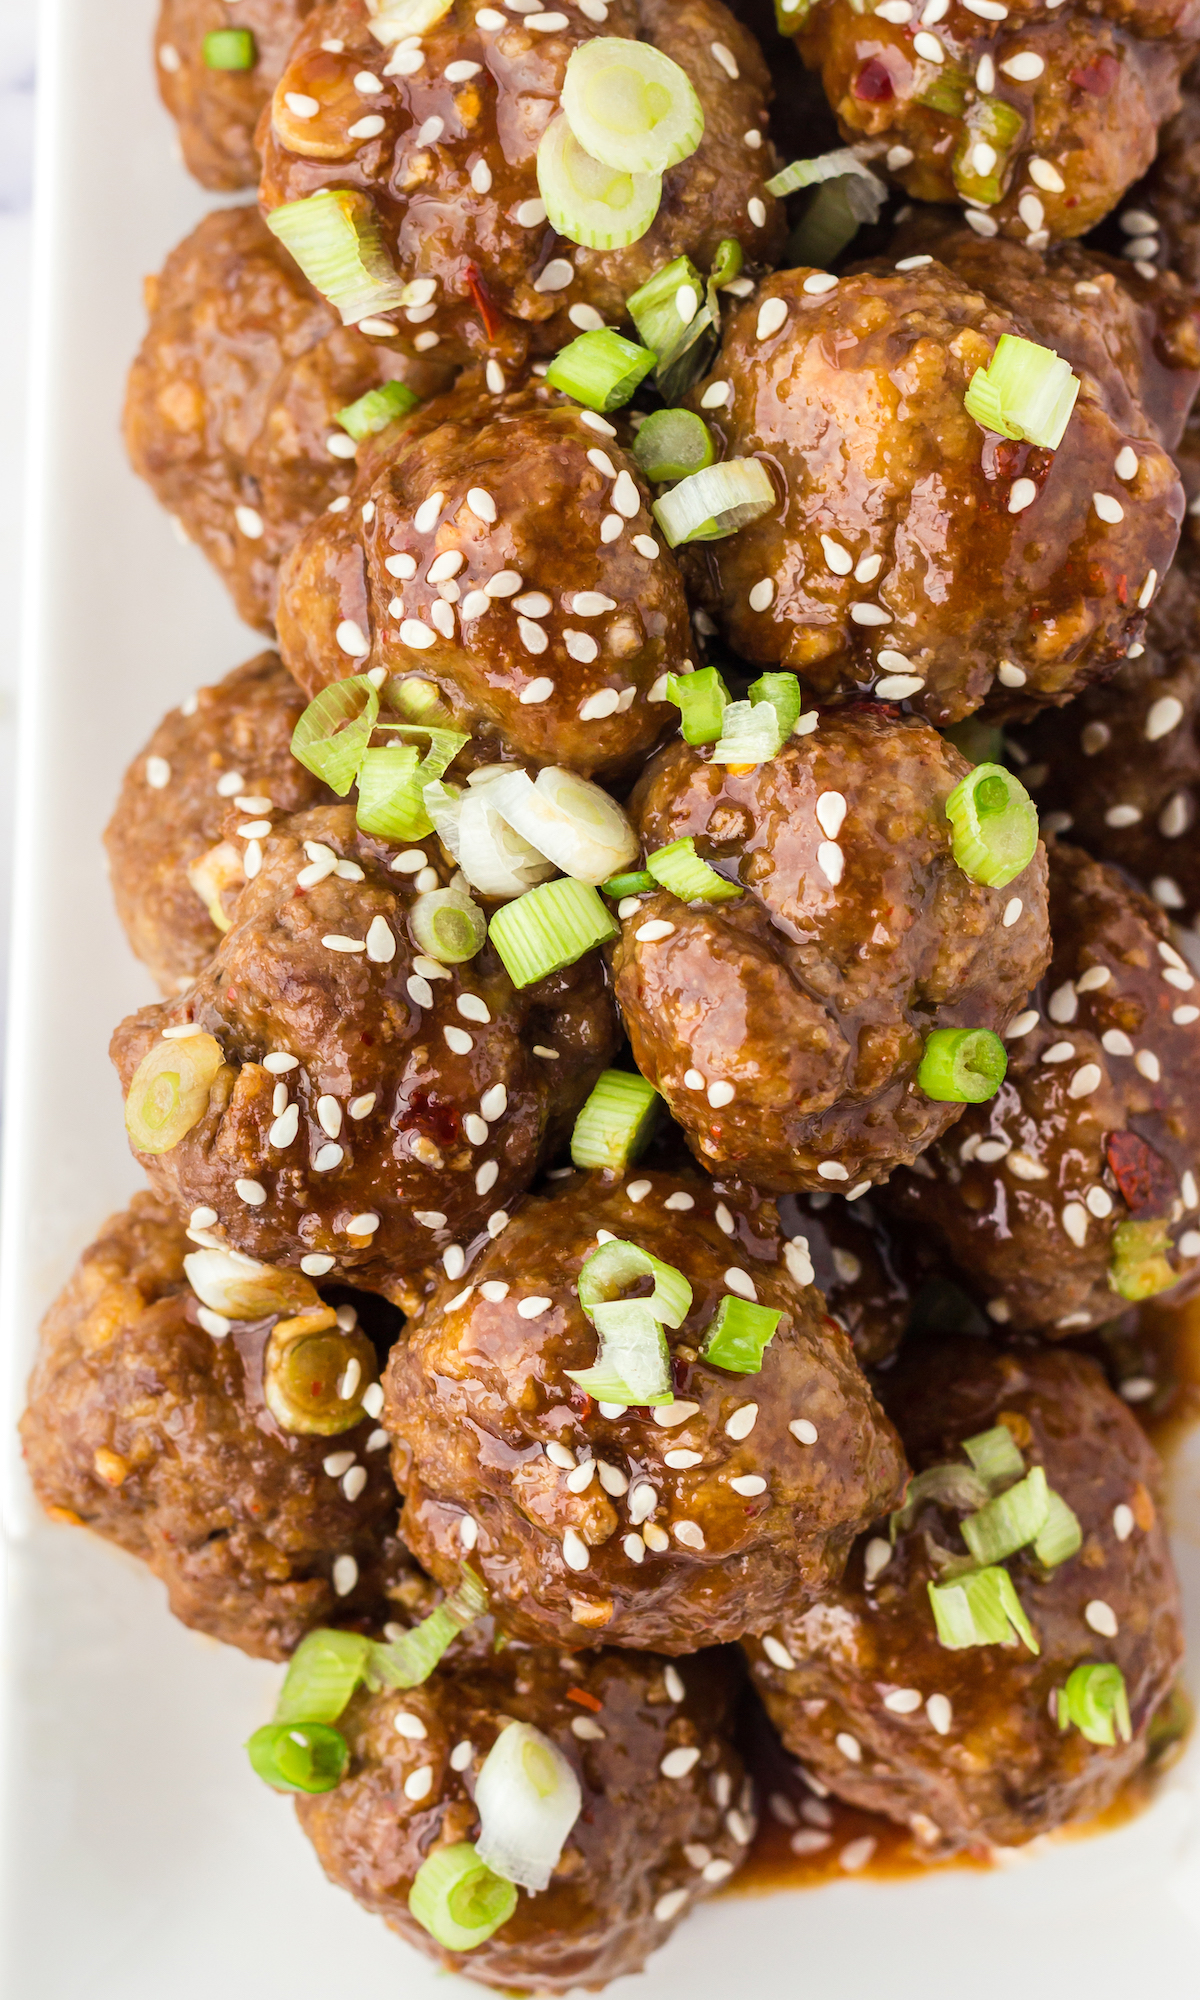 Overhead view of a few dozen Asian meatballs in brown sauce on a white plate. Garnished with sliced green onions and sesame seeds.